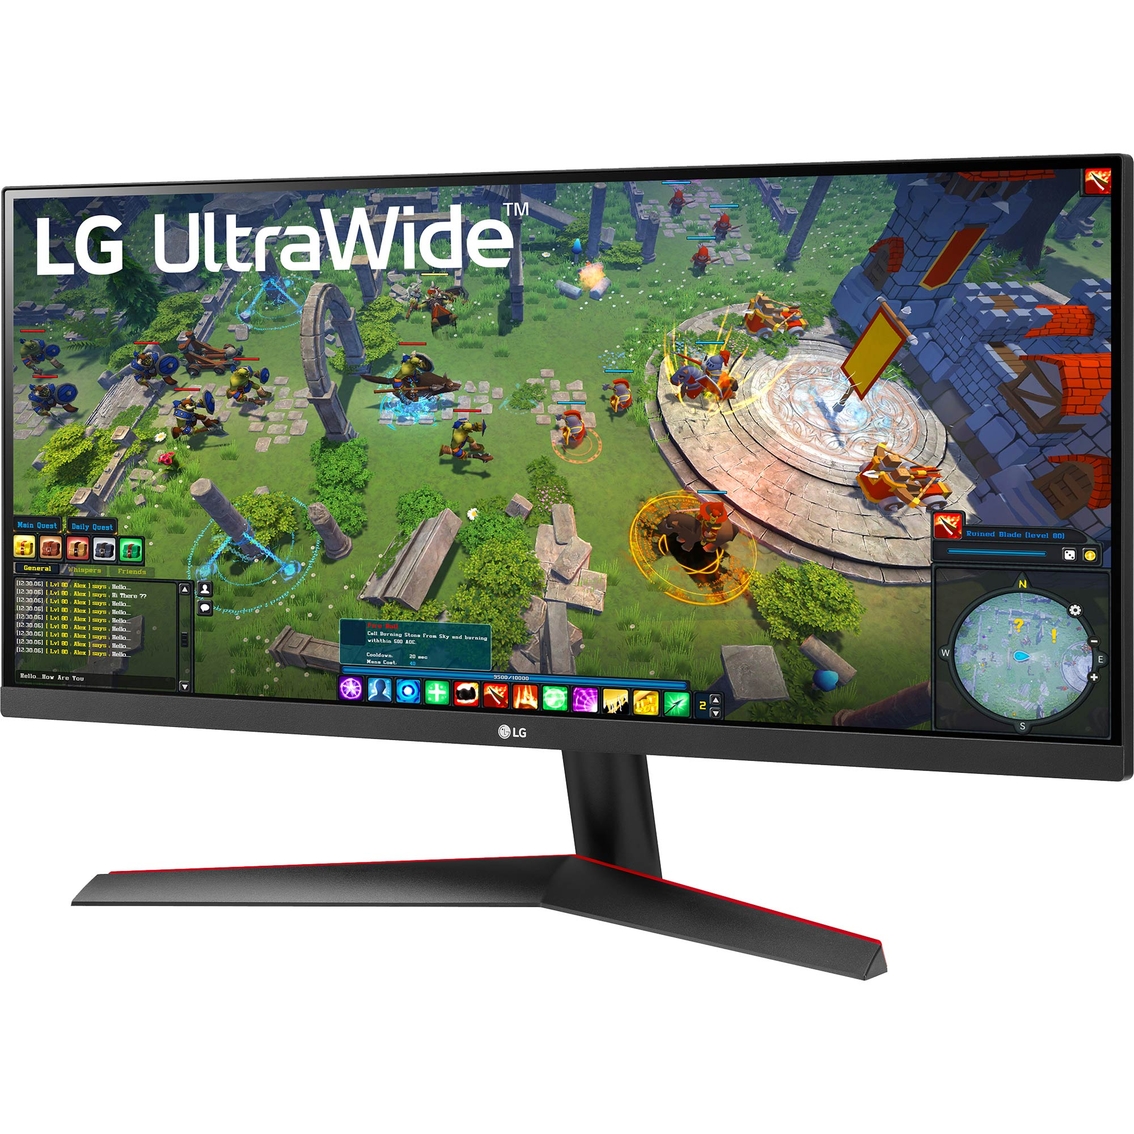 LG 29 in. UltraWide FHD HDR FreeSync Monitor 29WP60G-B - Image 2 of 7